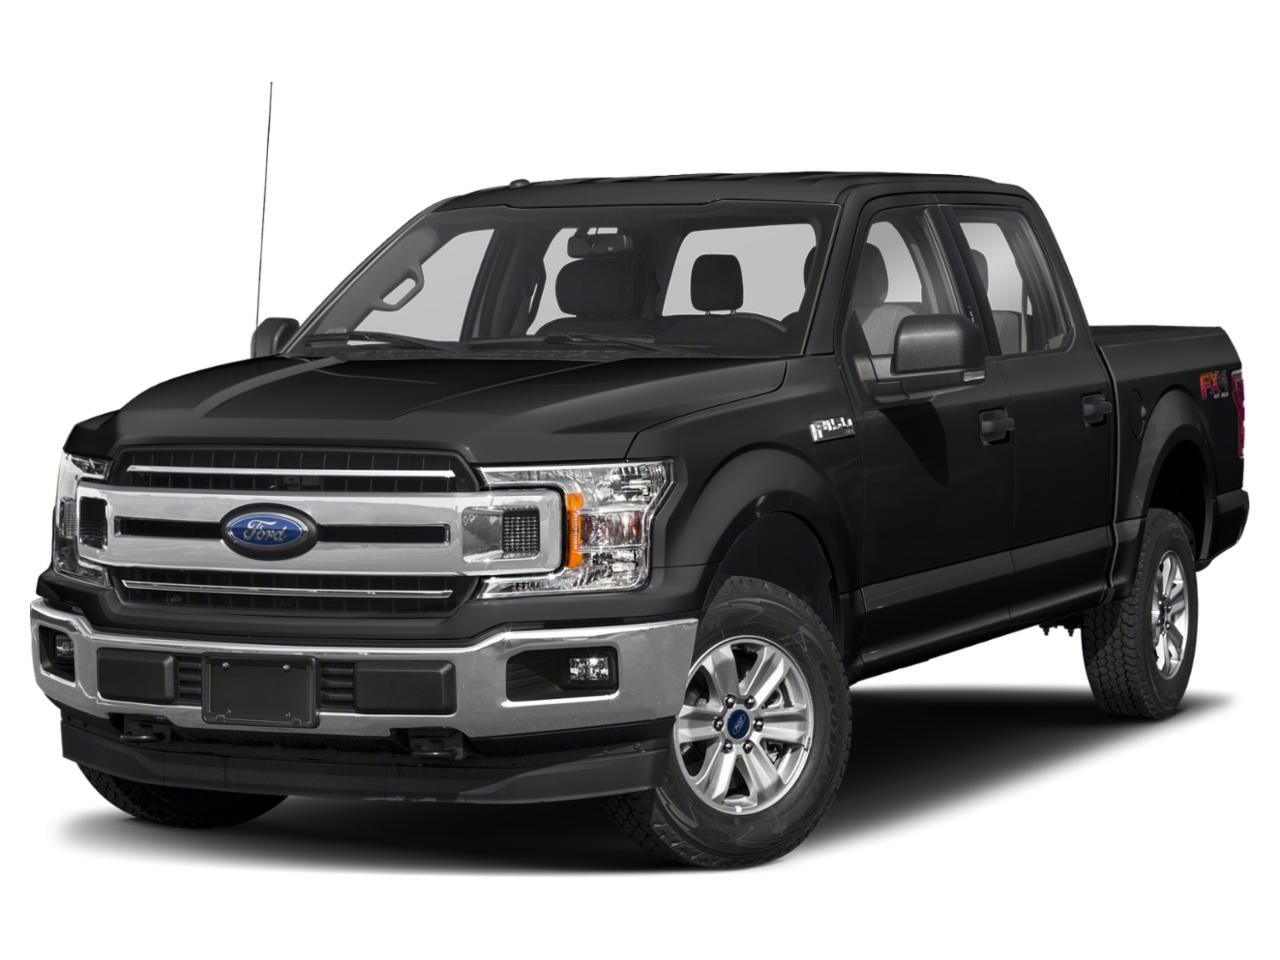 2020 Ford F-150 Vehicle Photo in ELYRIA, OH 44035-6349